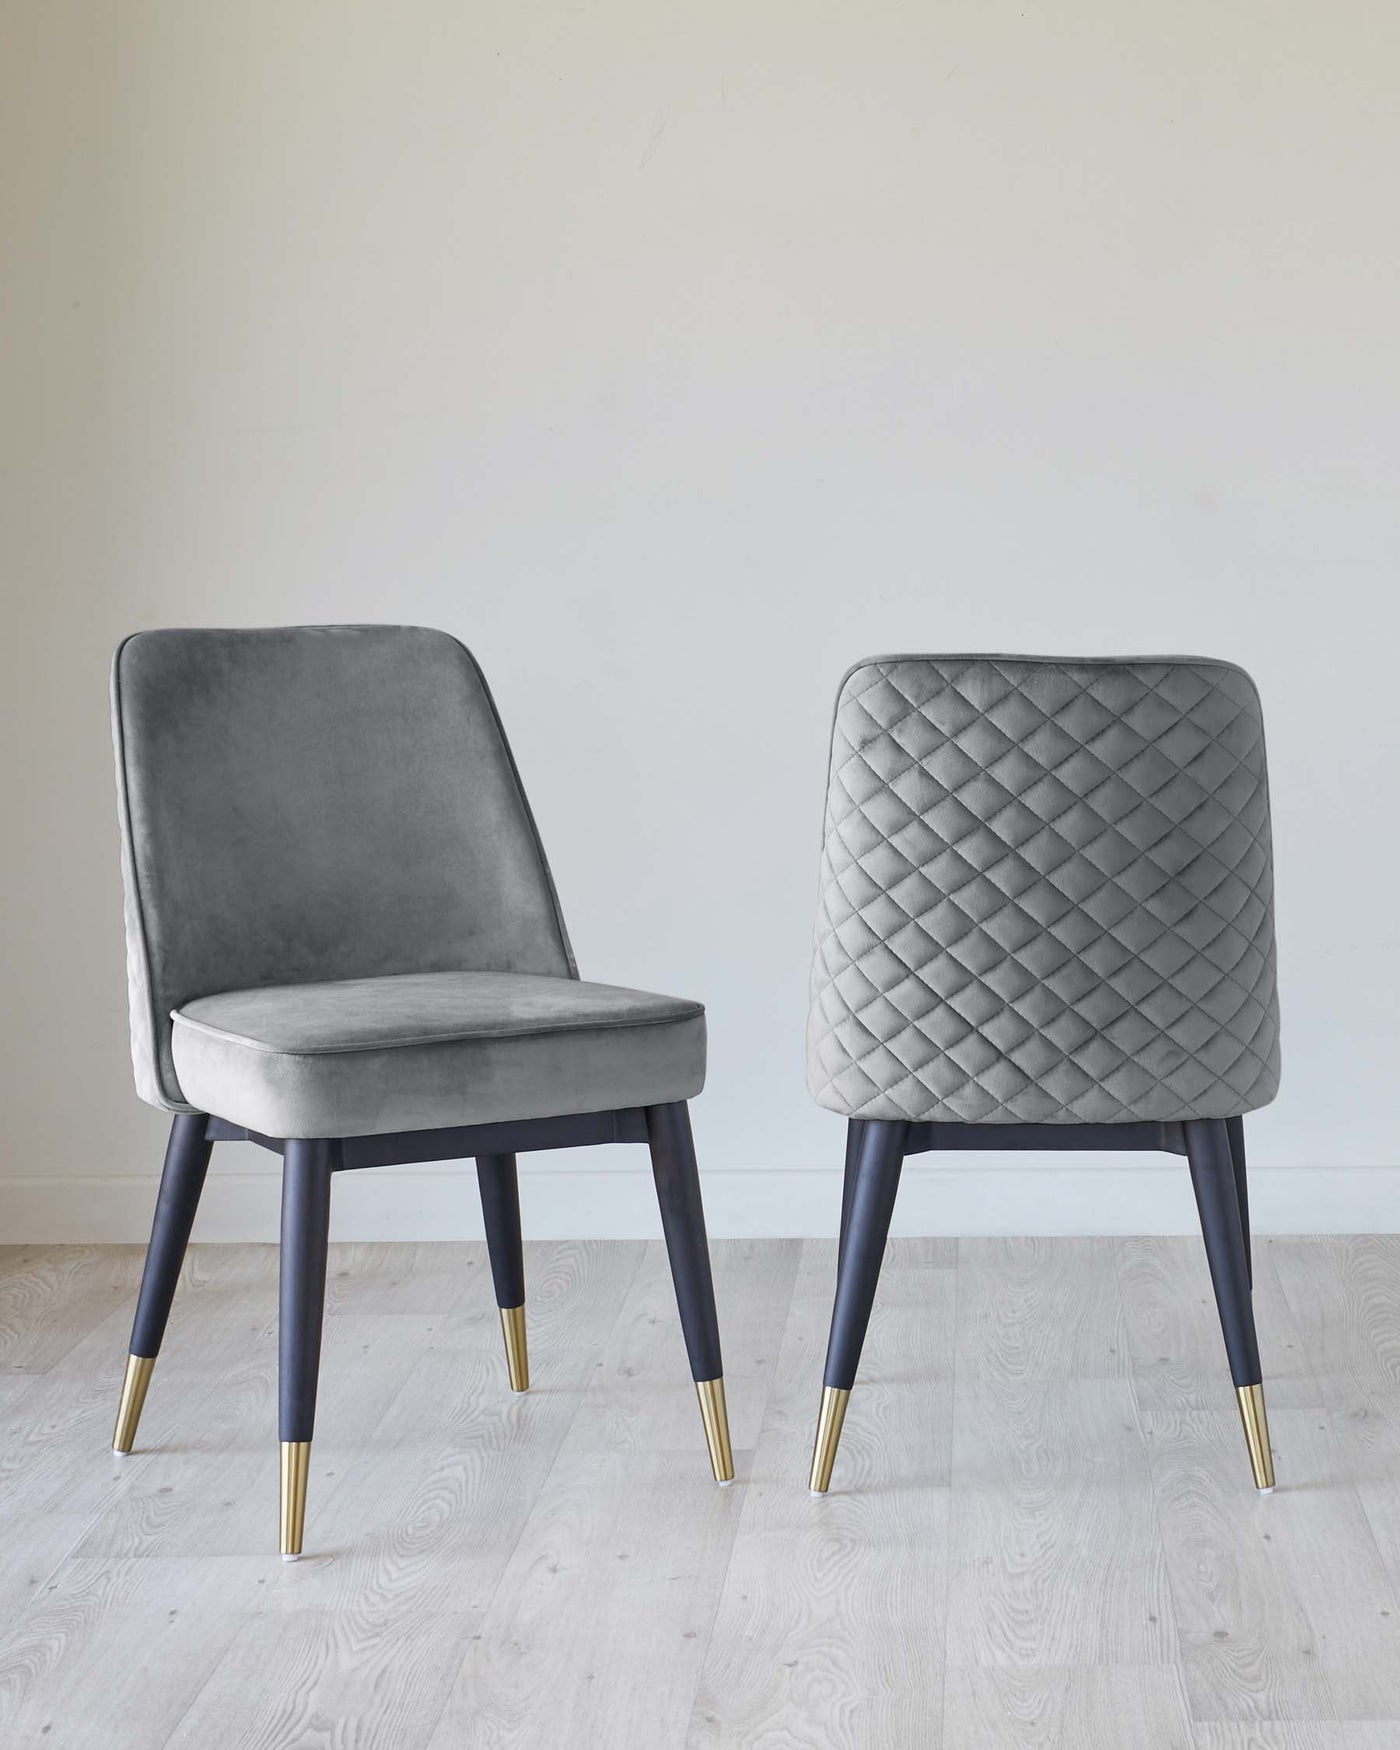 Two modern dining chairs with elegant velvet upholstery in grey, featuring one with a smooth finish and the other with a diamond tufted backrest. Both chairs have dark wooden legs accented with gold tips, set against a light wooden floor and a clean white wall backdrop.